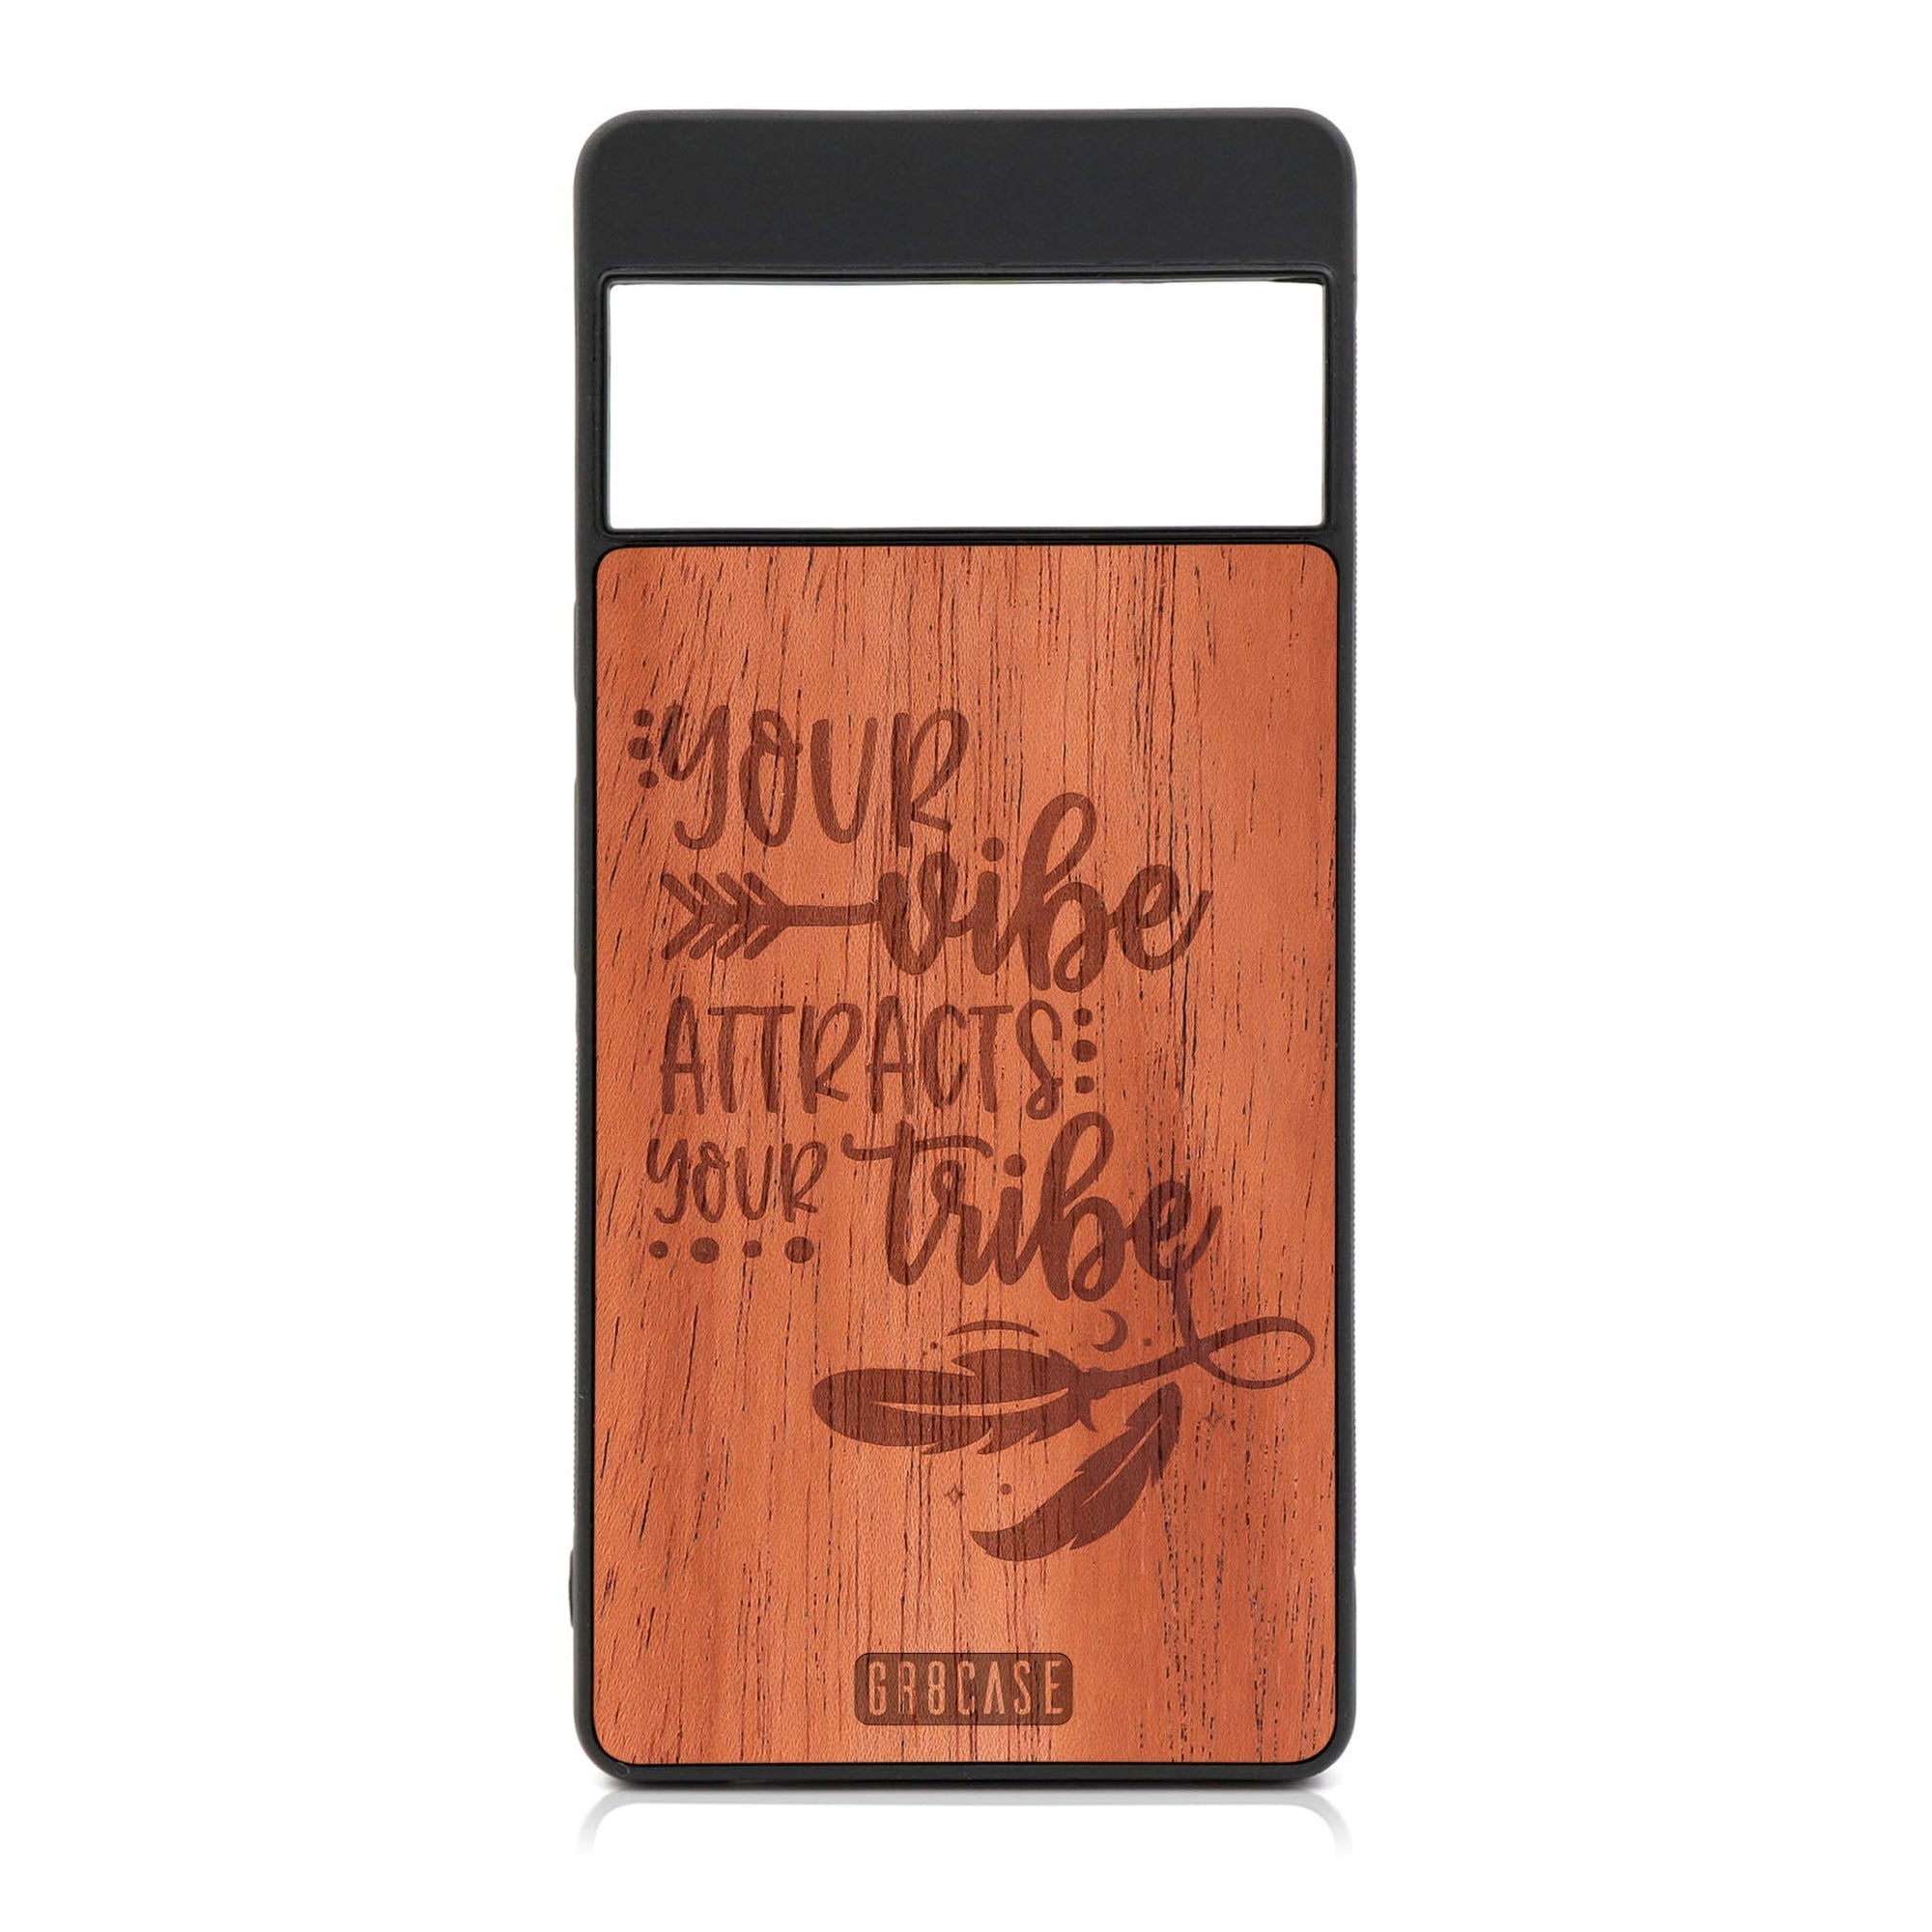 Your Vibe Attracts Your Tribe Design Wood Case For Google Pixel 6A